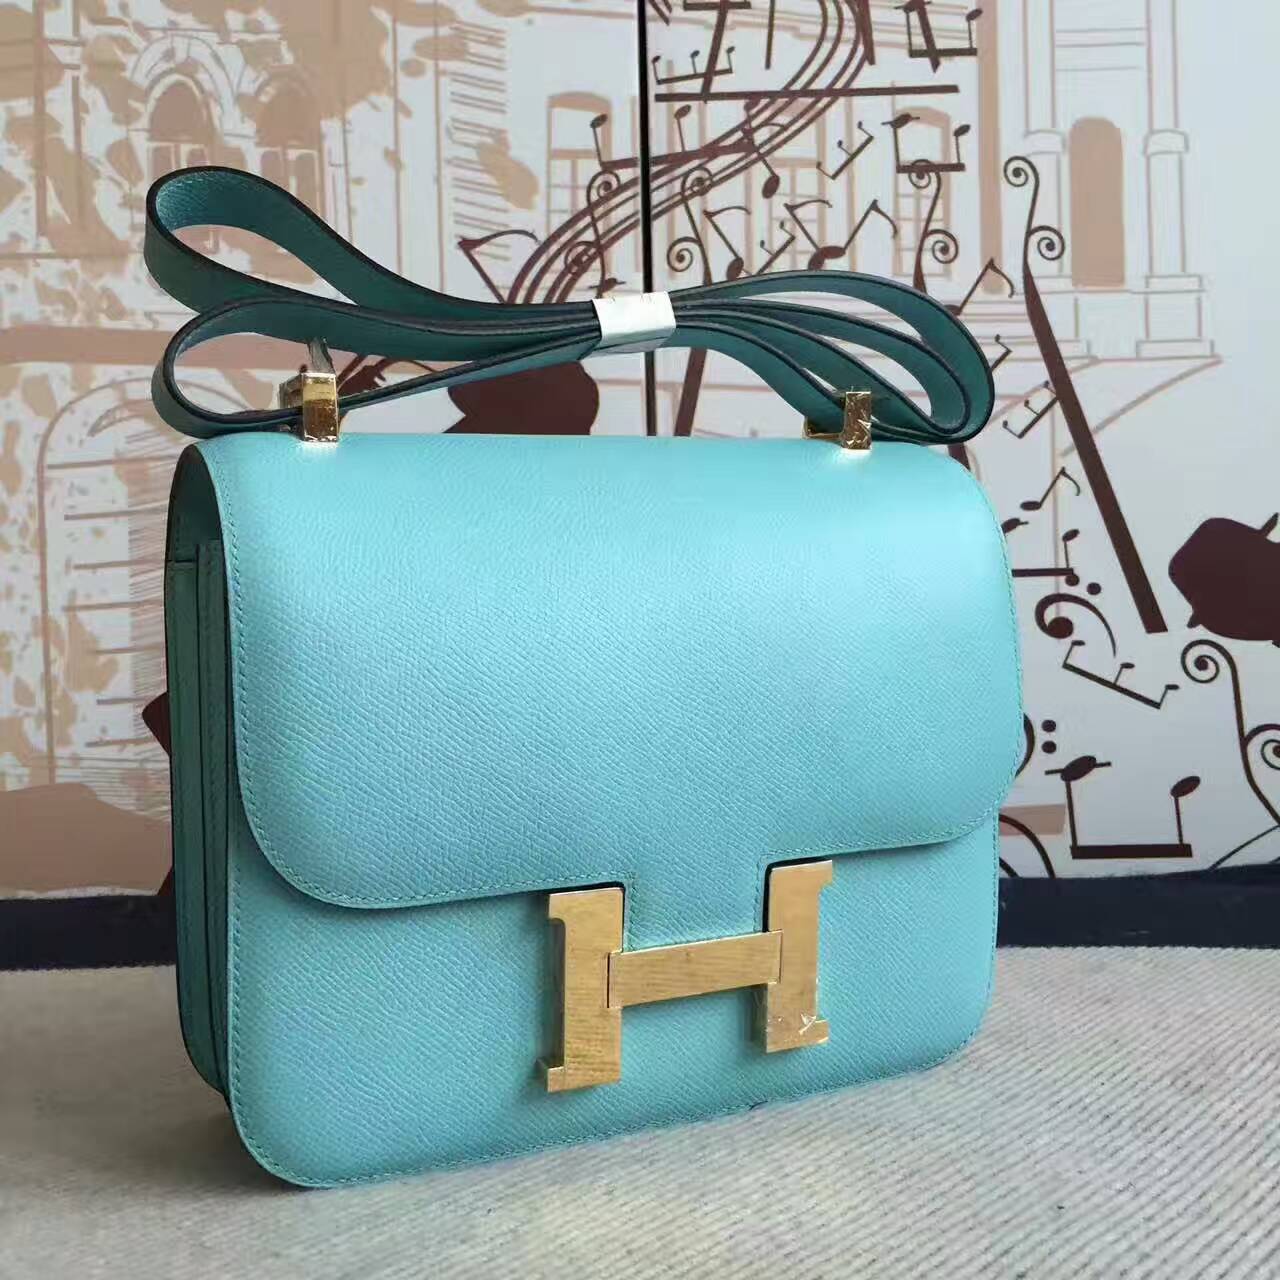 Hand Stitching Hermes 3P Blue Attol Epsom Leather Constance Bag 24cm